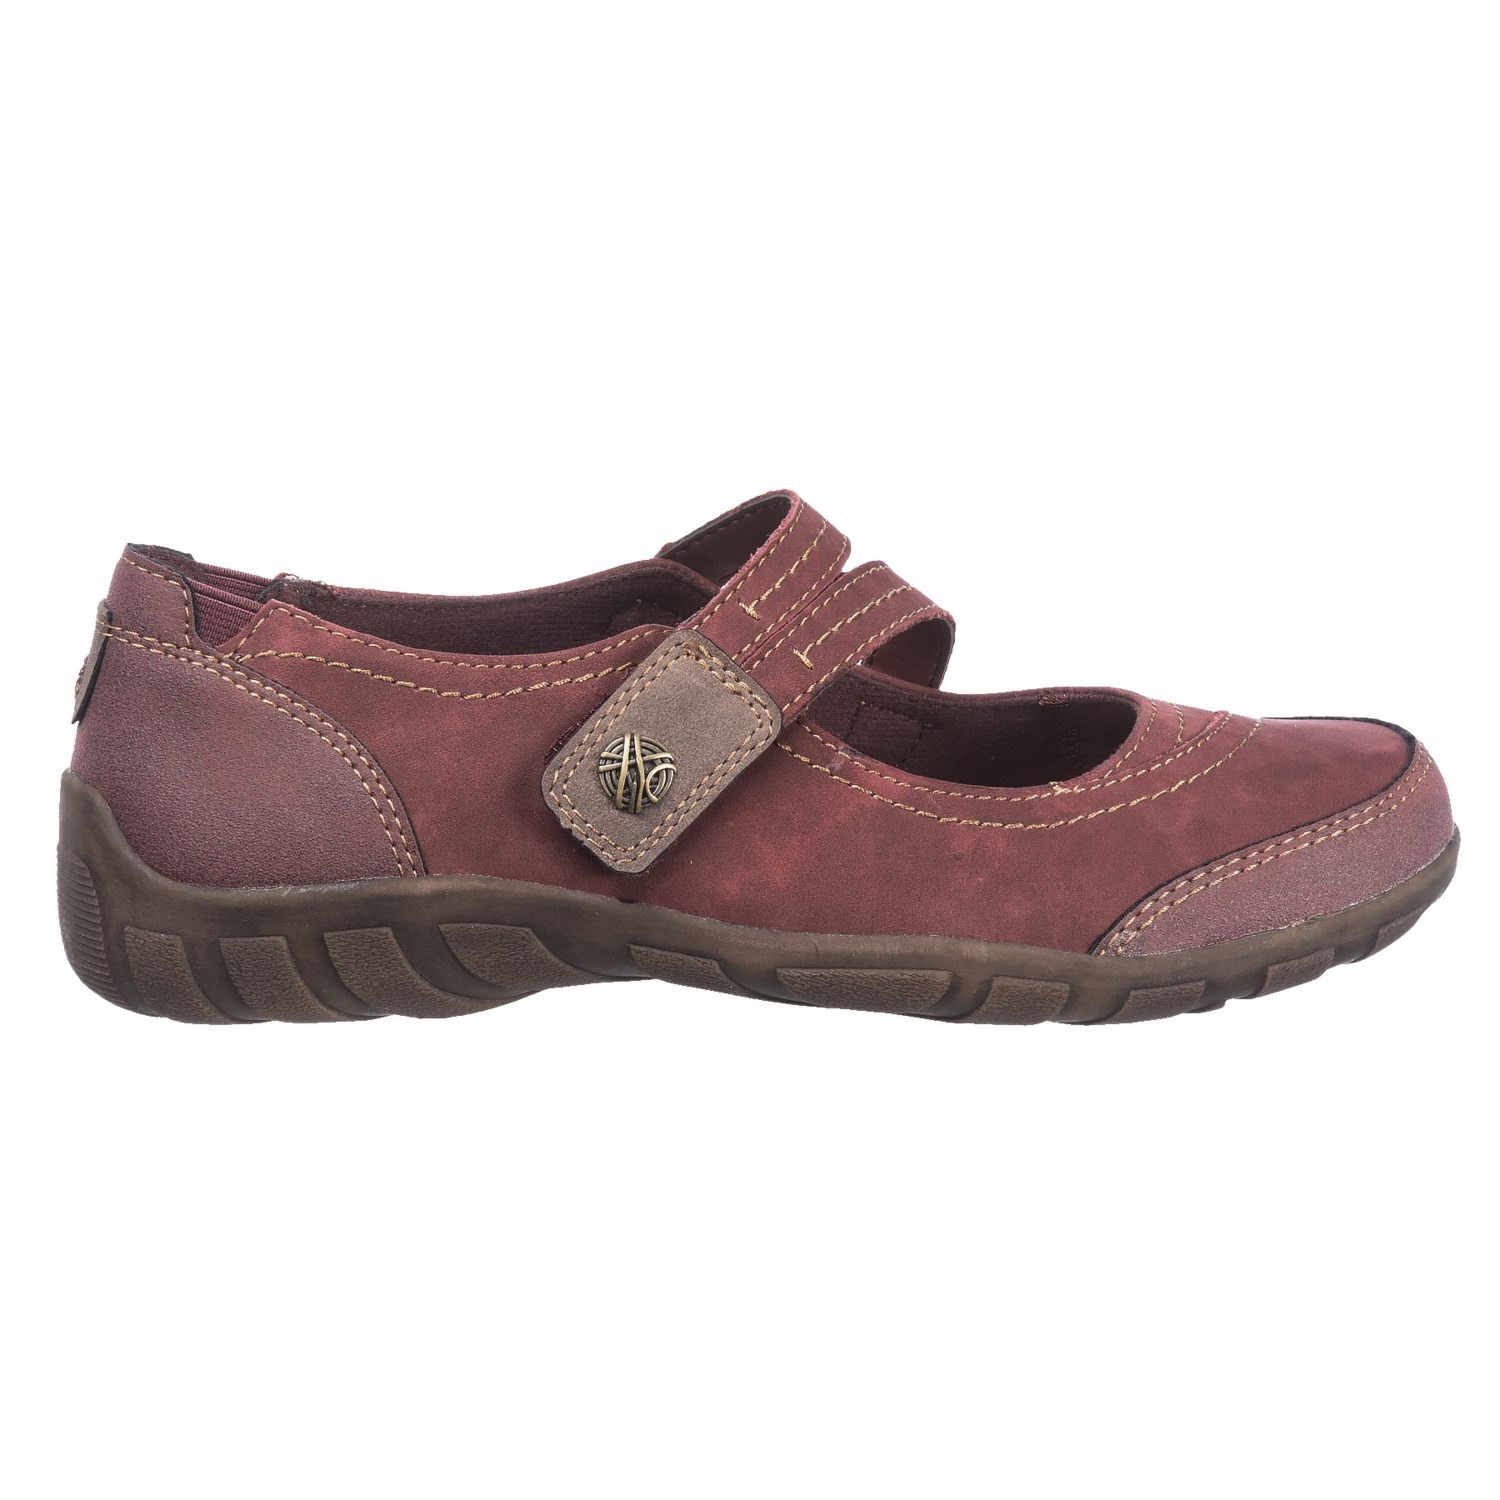 Earth Origins Rory Mary Jane Shoes (For Women) - Save 49%